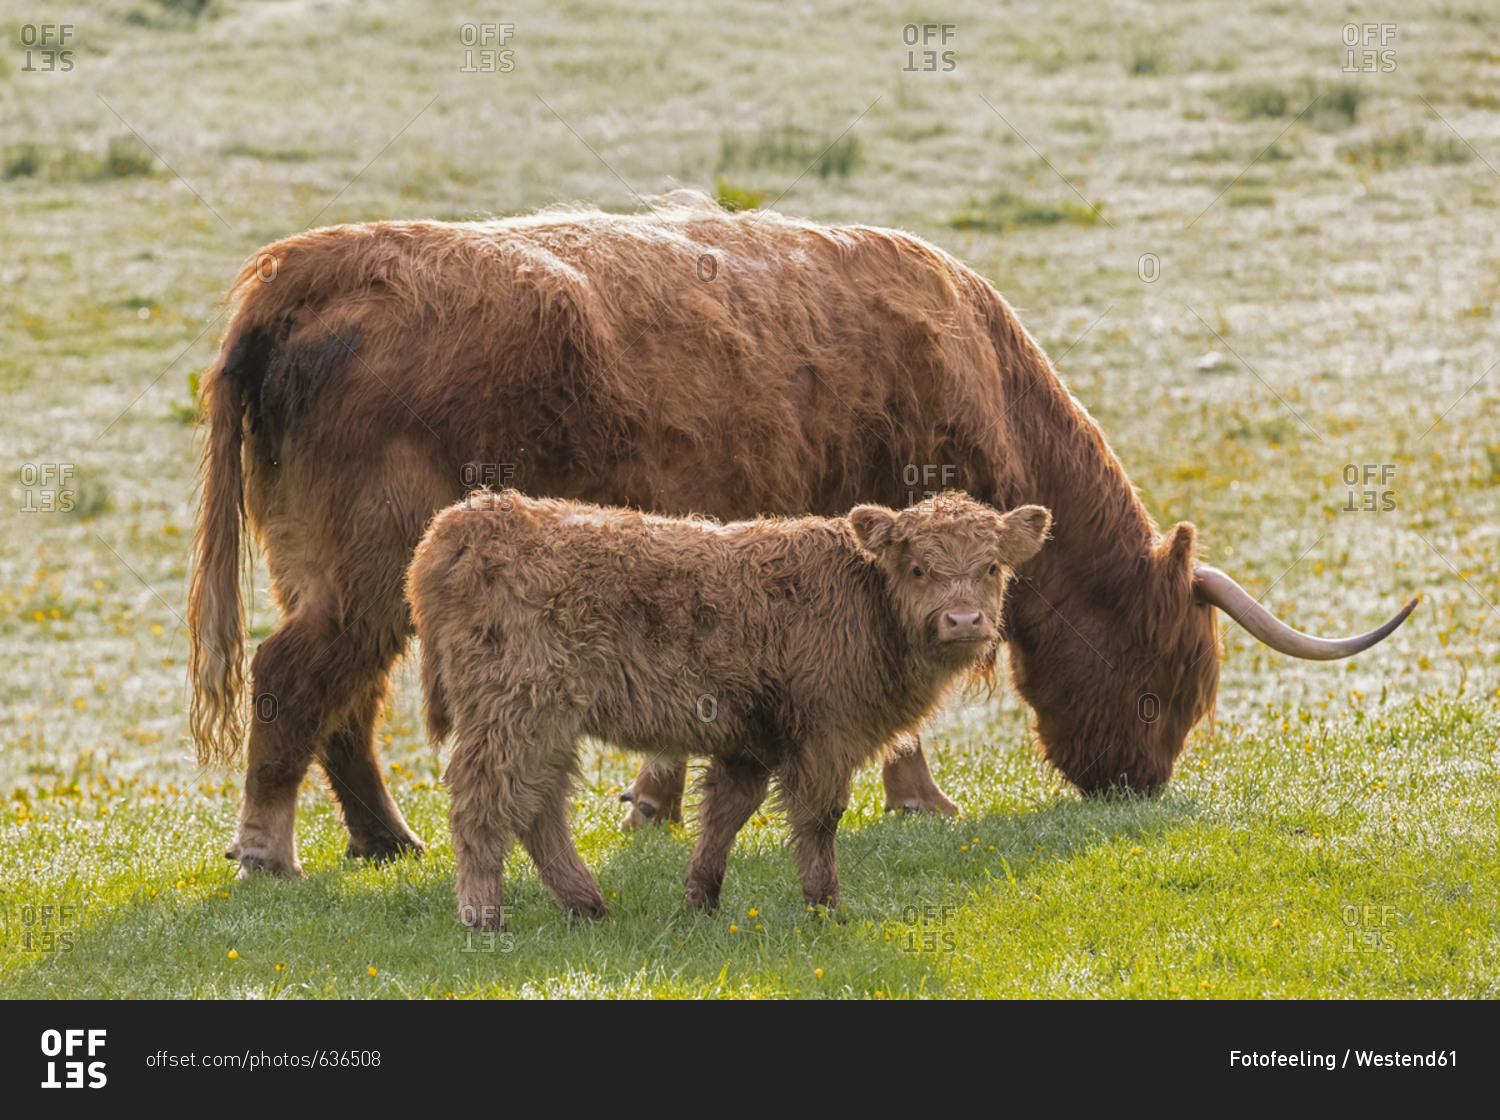 Great Britain- Scotland- Scottish Highlands- Highland cattle with young animal